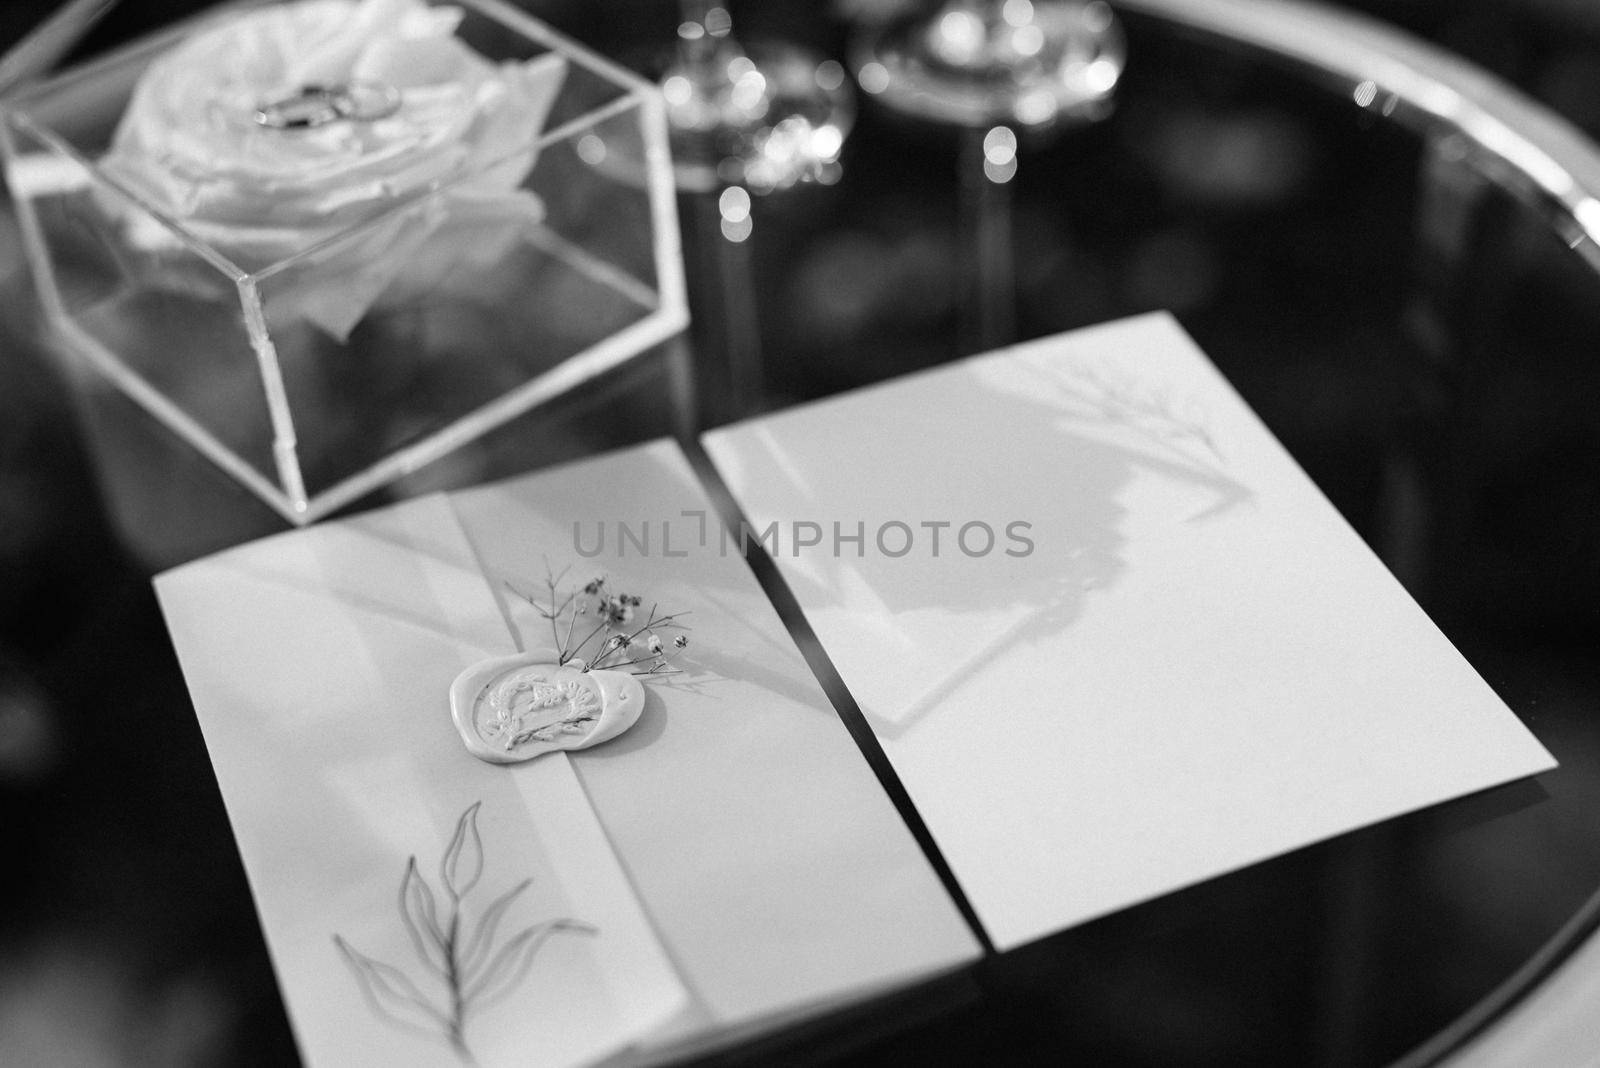 wedding invitation in a blue envelope on a table with green sprigs